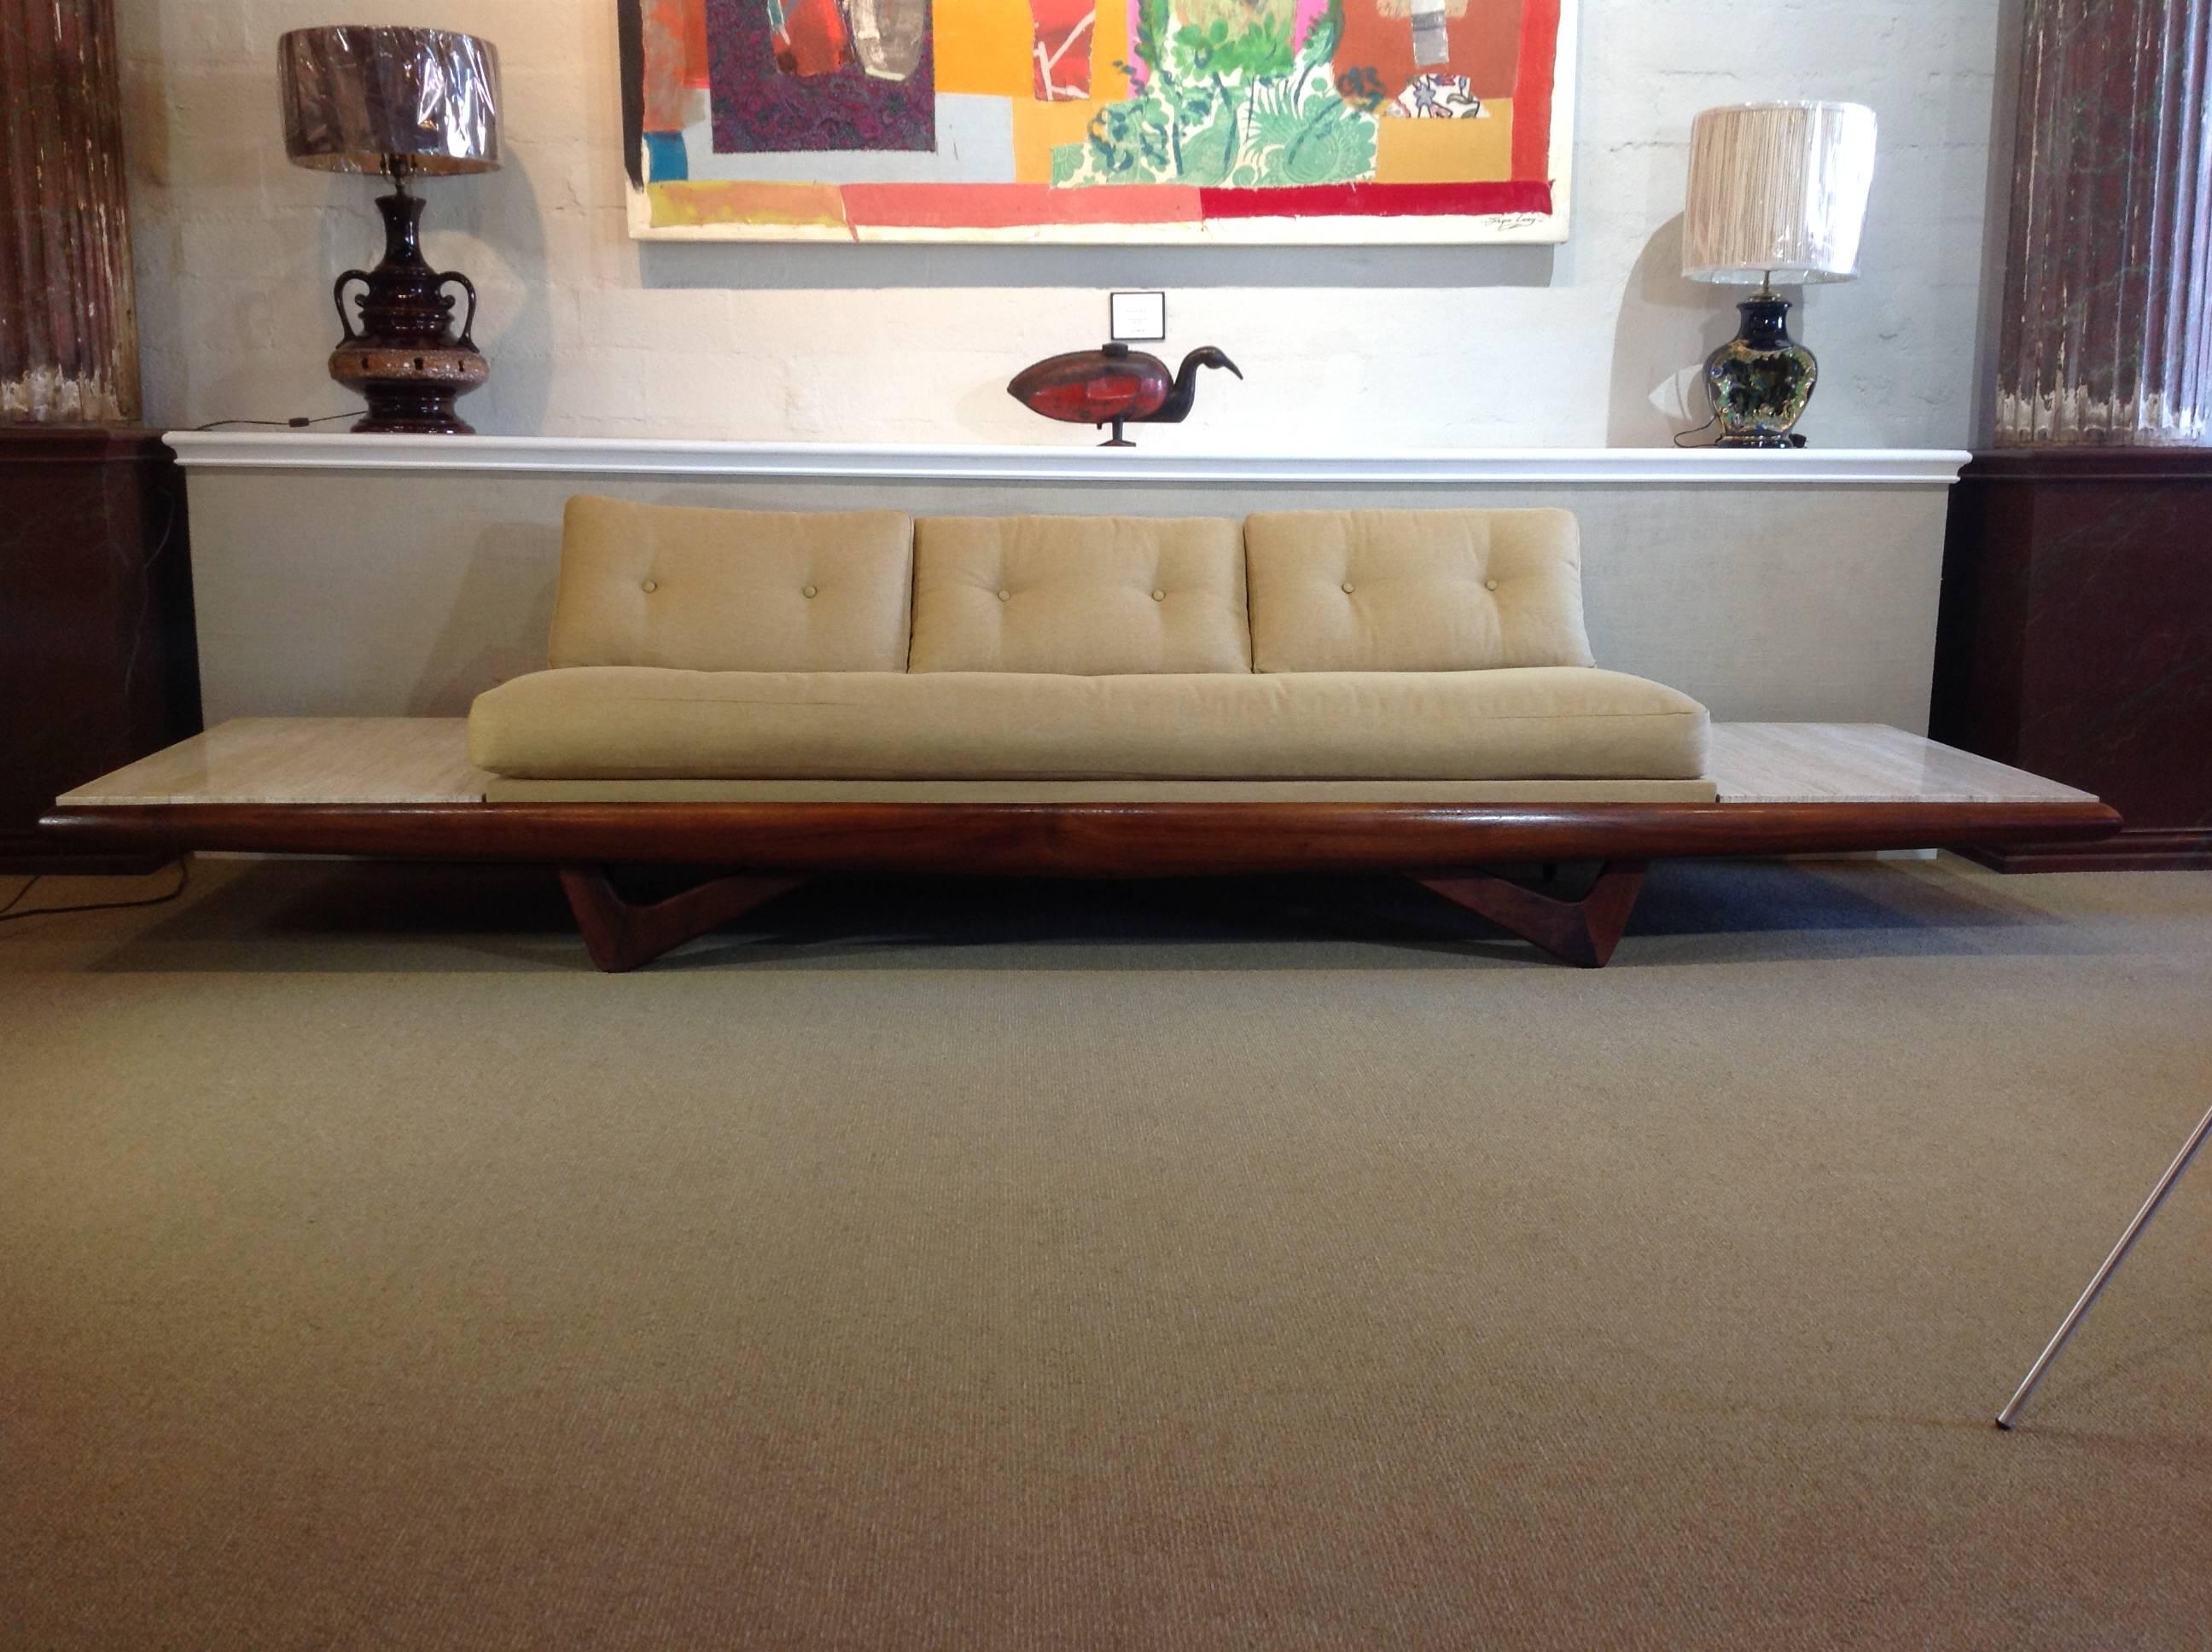 1950s sofa by designer Adrian Pearsall. This model was manufactured with the rarer "atomic " style feet. Rich walnut wood, with Roman travertine stone tabletops on each side. Newly upholstered with quality, light-beige fabric in